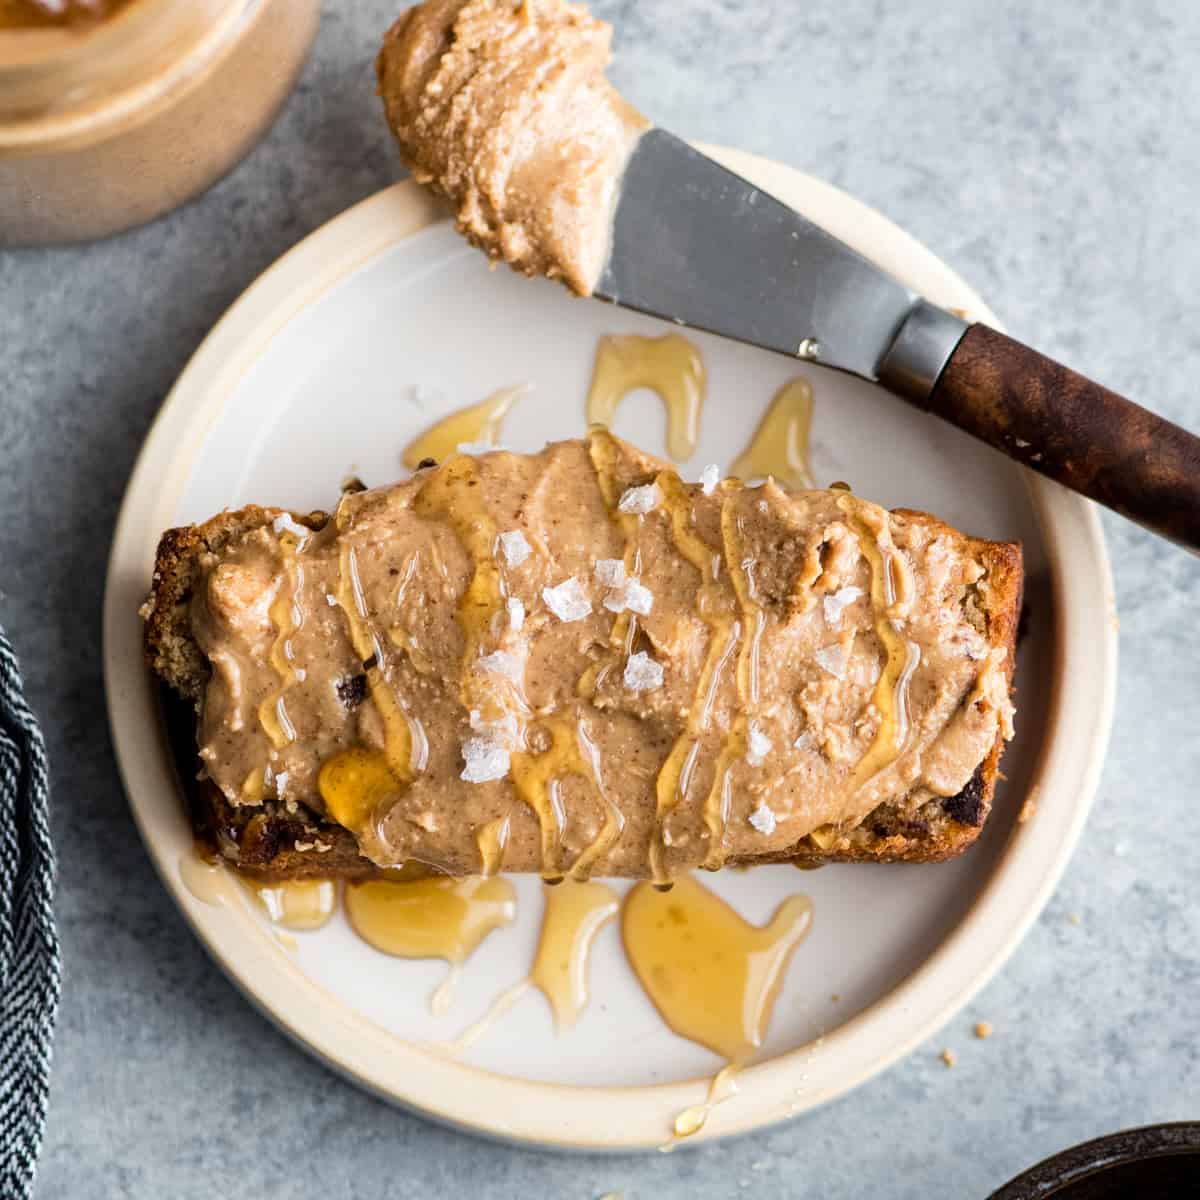 vanilla almond butter spread on a piece of banana bread drizzled with honey and sea salt